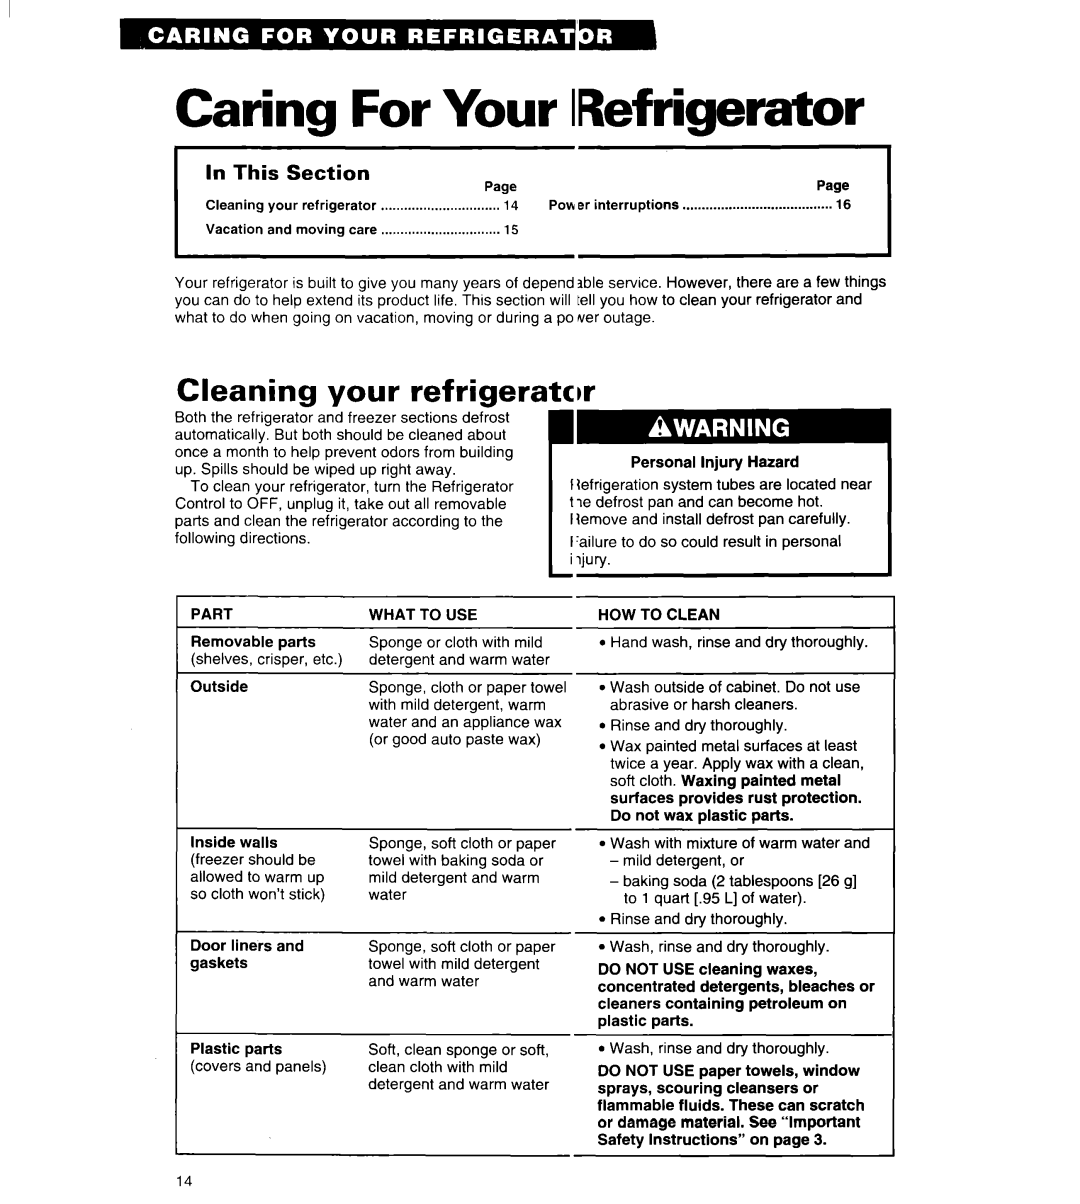 Whirlpool ET18UK, ET20LK, ET18LK warranty Caring For Your IRefrigerator, Clei aning your refrigeratcw, In This, Section 